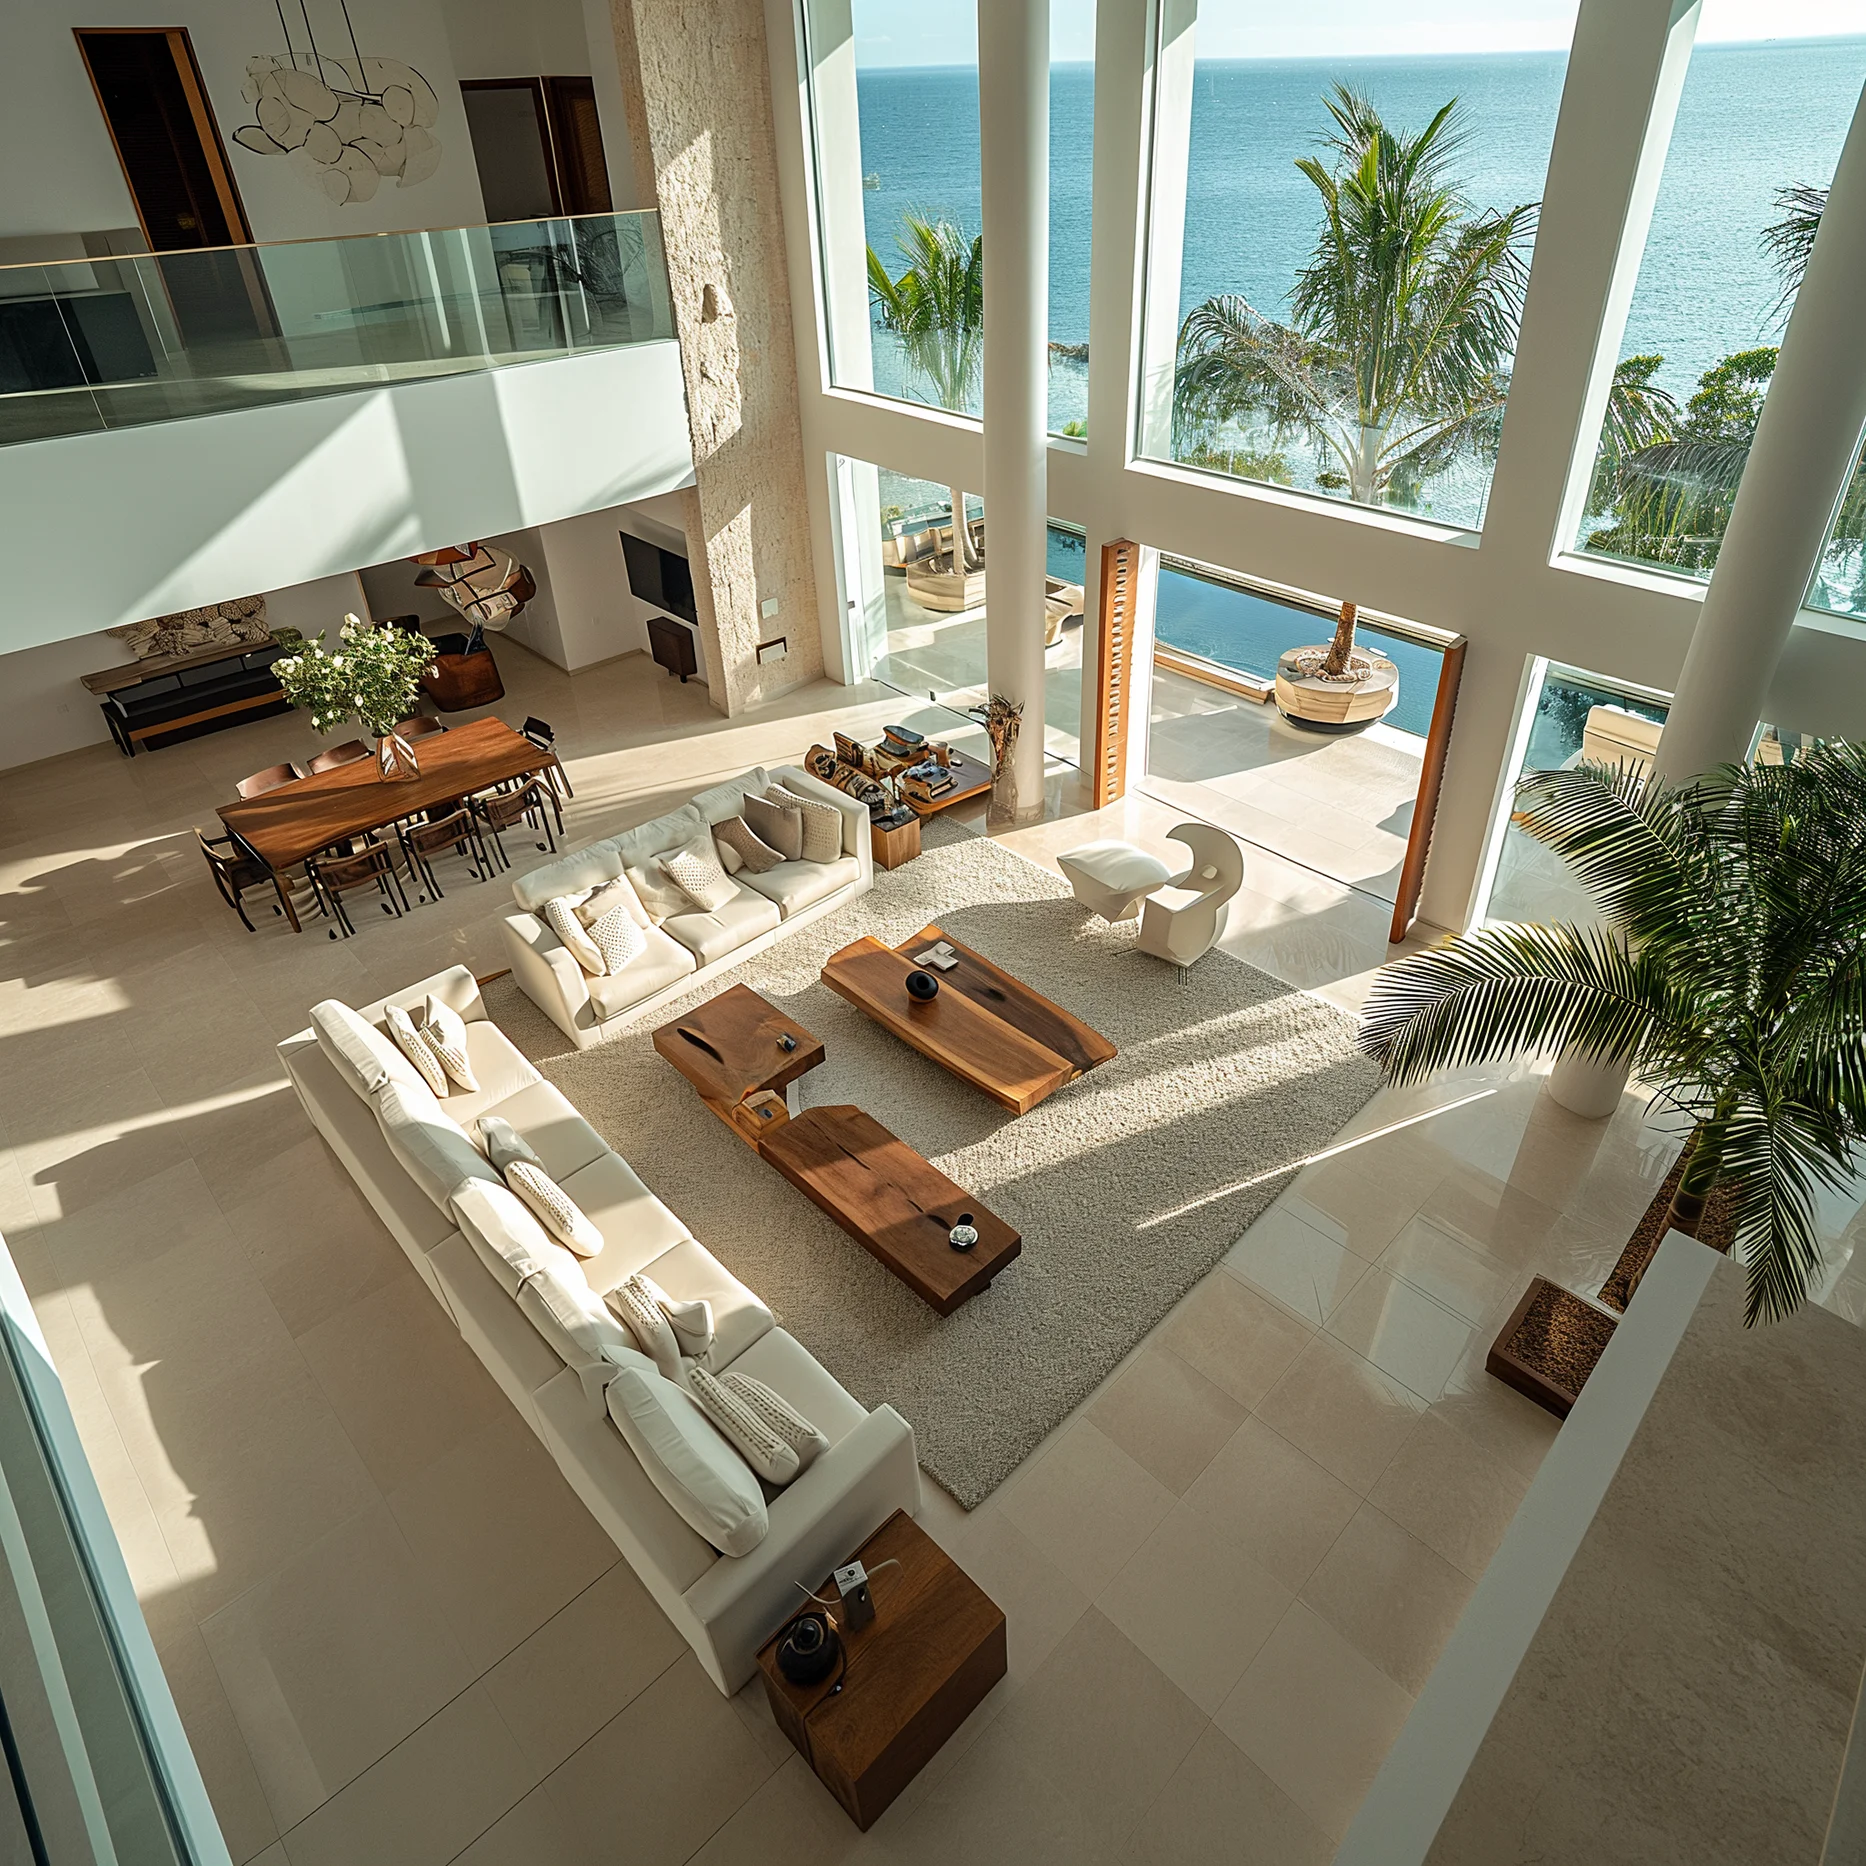 Luxurious and spacious villa living room